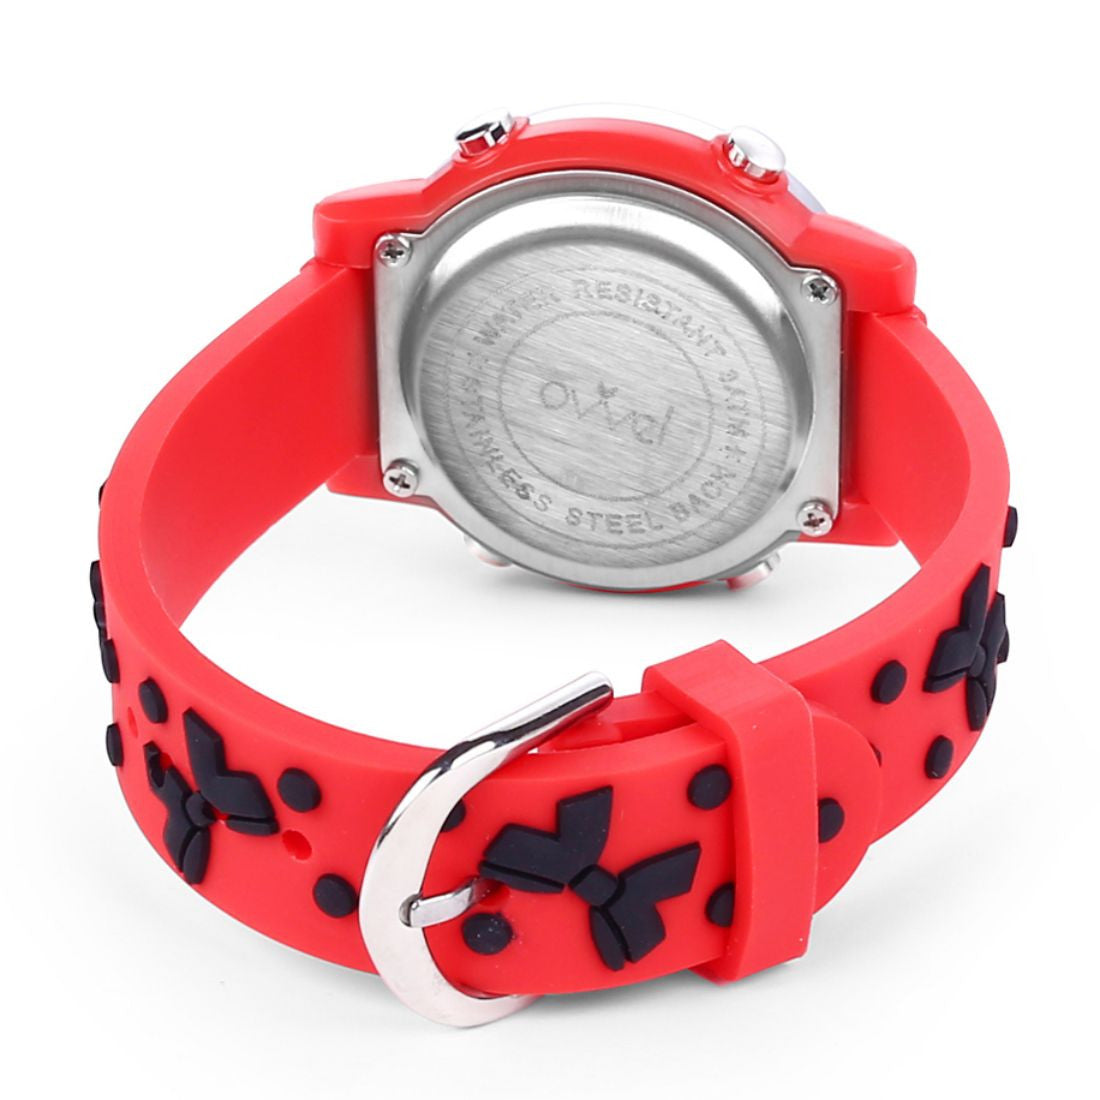 Girls Digital Sports Watch with many features - Red Band with Black Bows